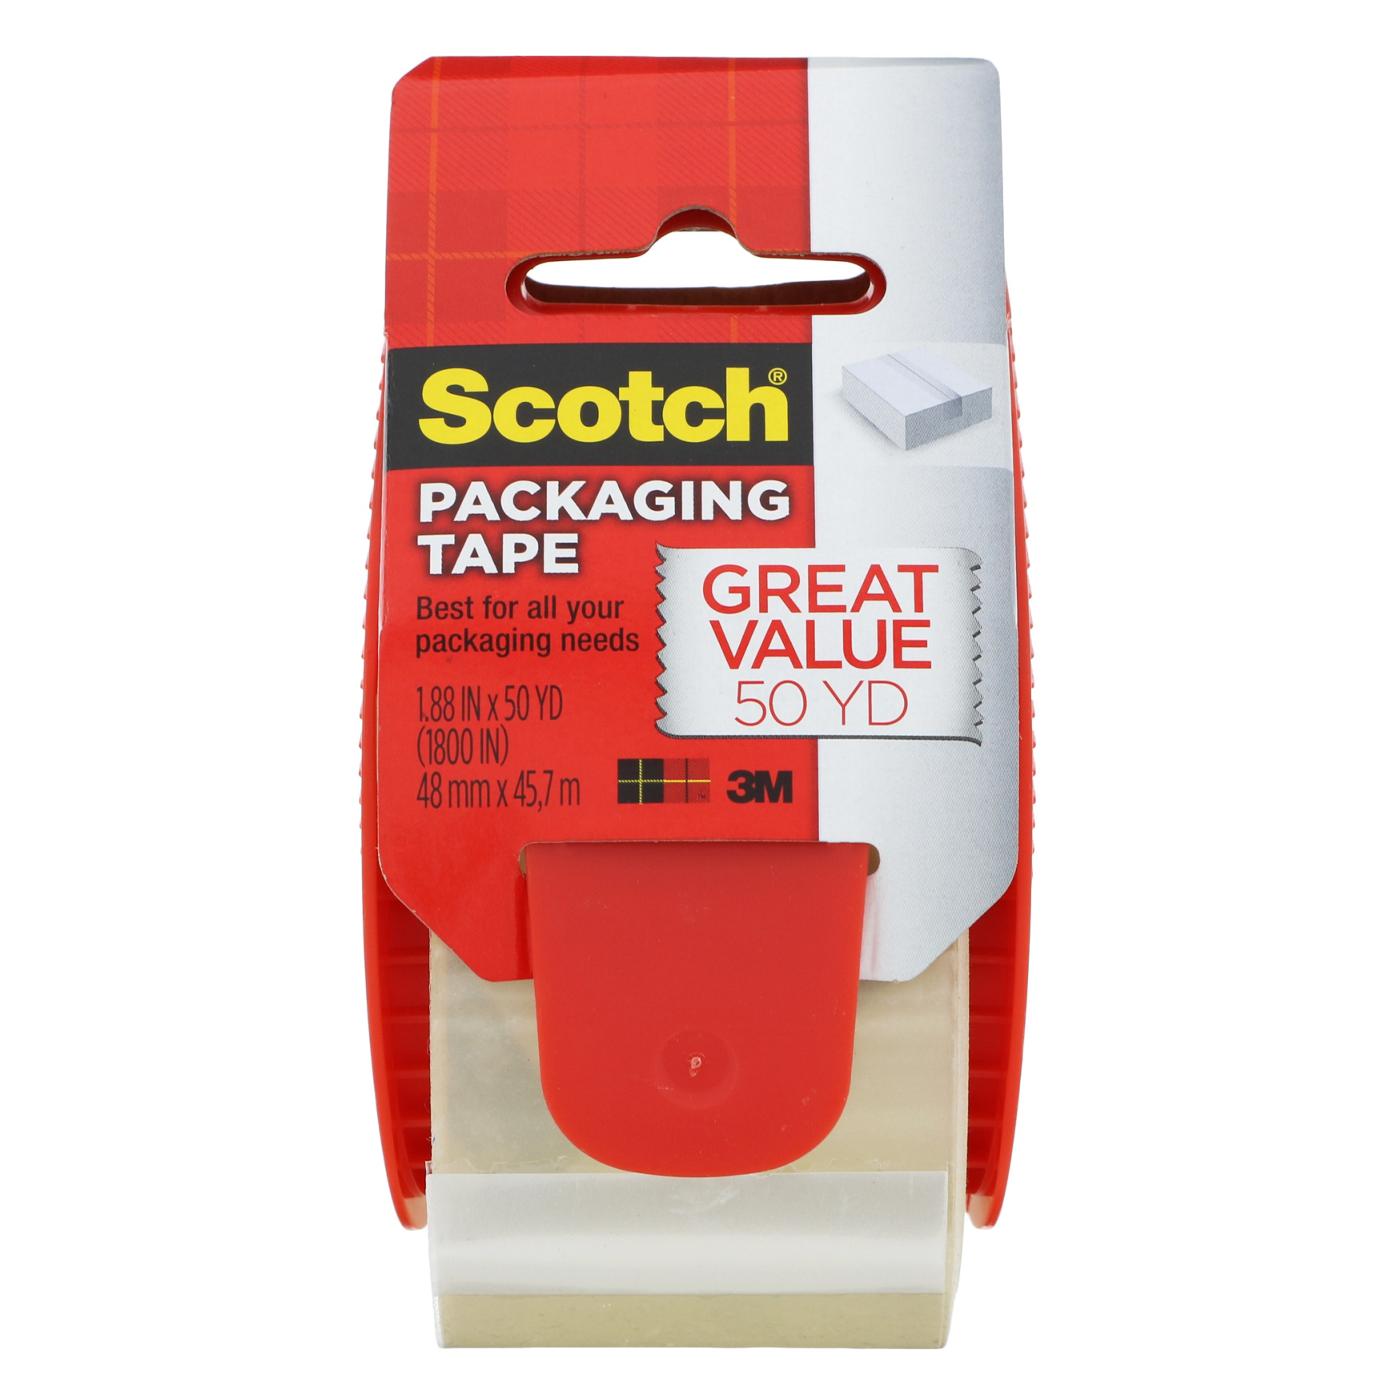 Scotch Shipping Pack Tape; image 1 of 2